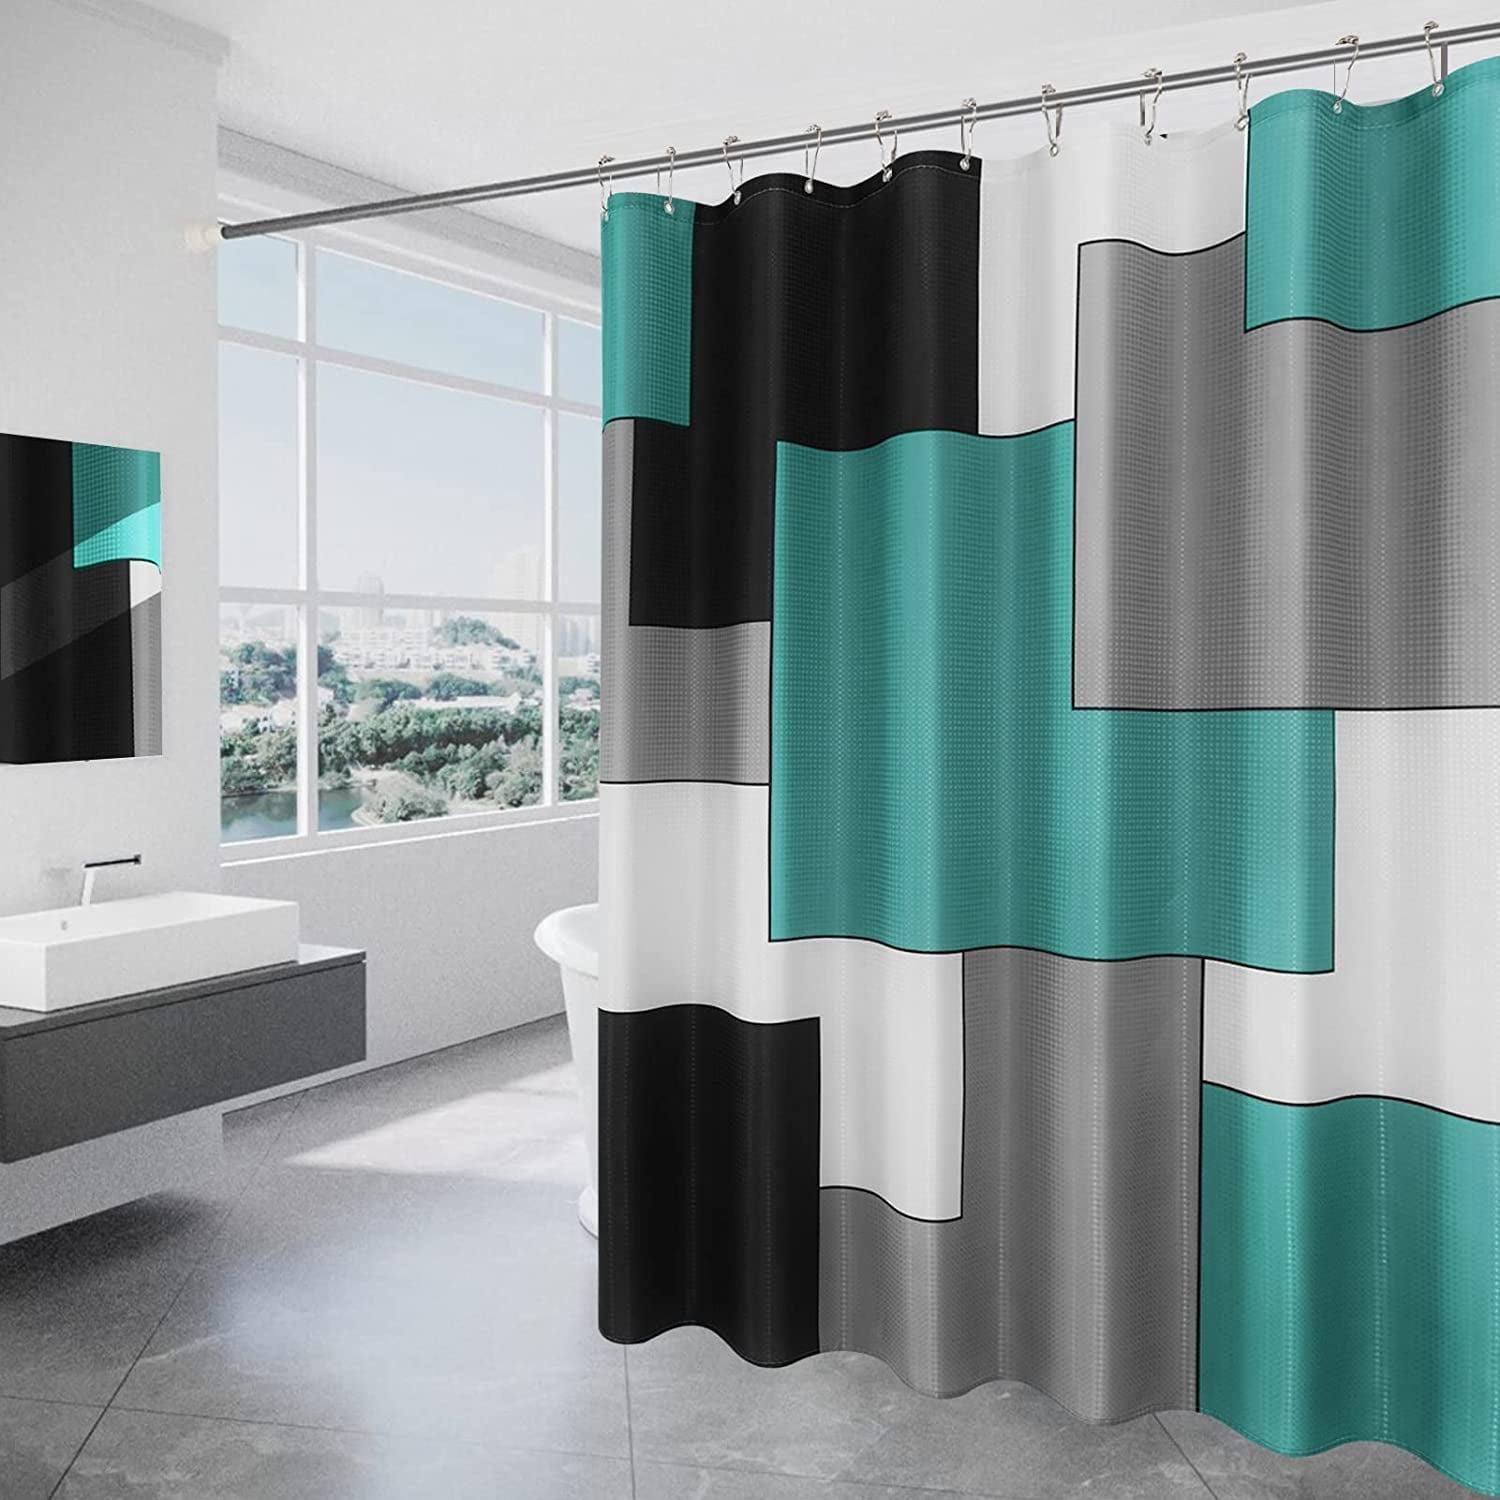 HTOOQ Teal Shower Curtain 60 x 72, Turquoise Shower Curtain for HTOOQ Decor,  Abstract Modern Ombre Waterproof Fabric Shower Curtain with Hooks 